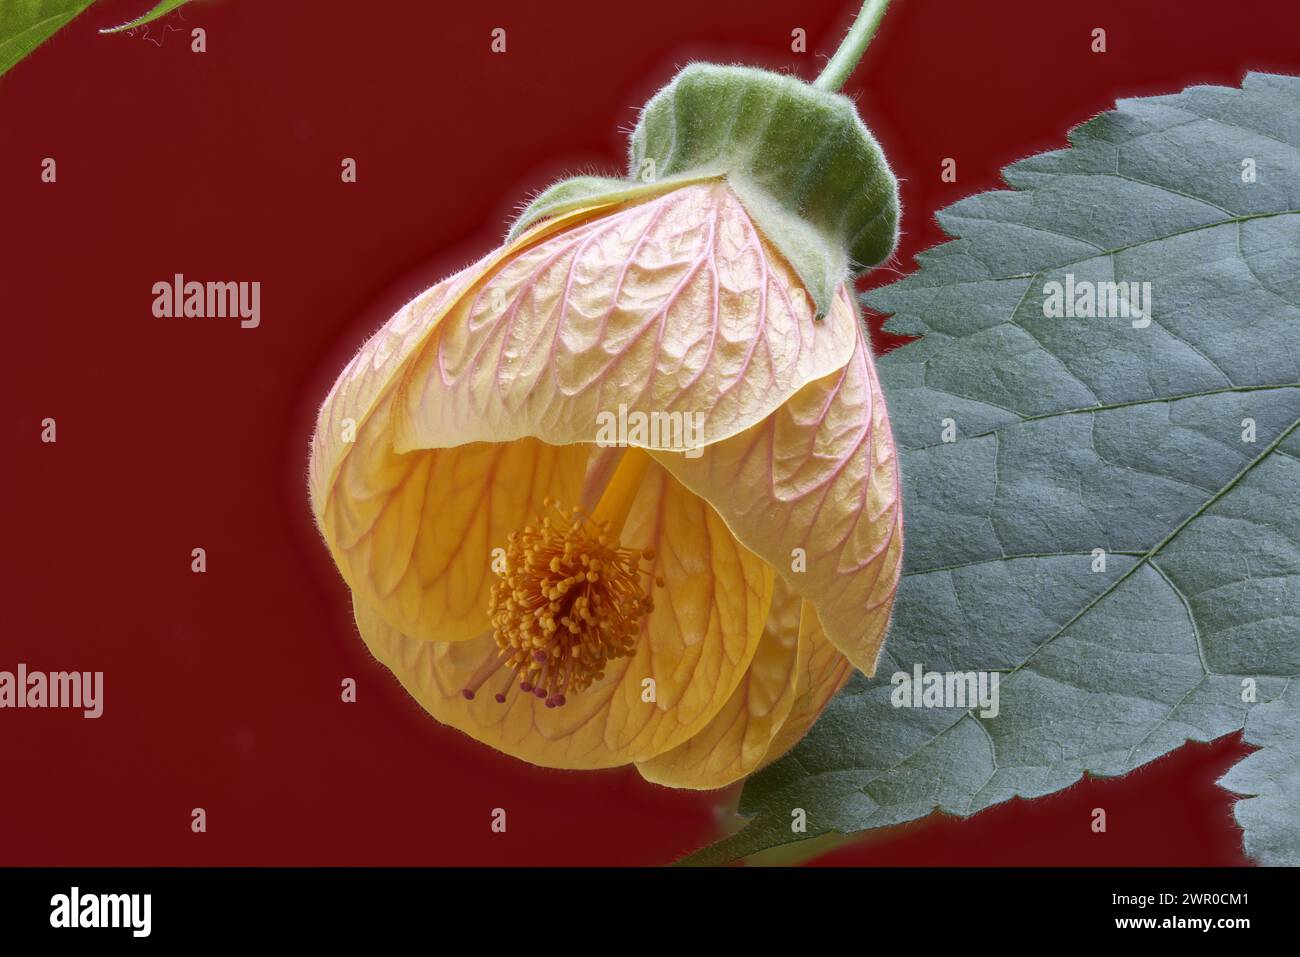 Flower Abutilon pictum on a red background Stock Photo